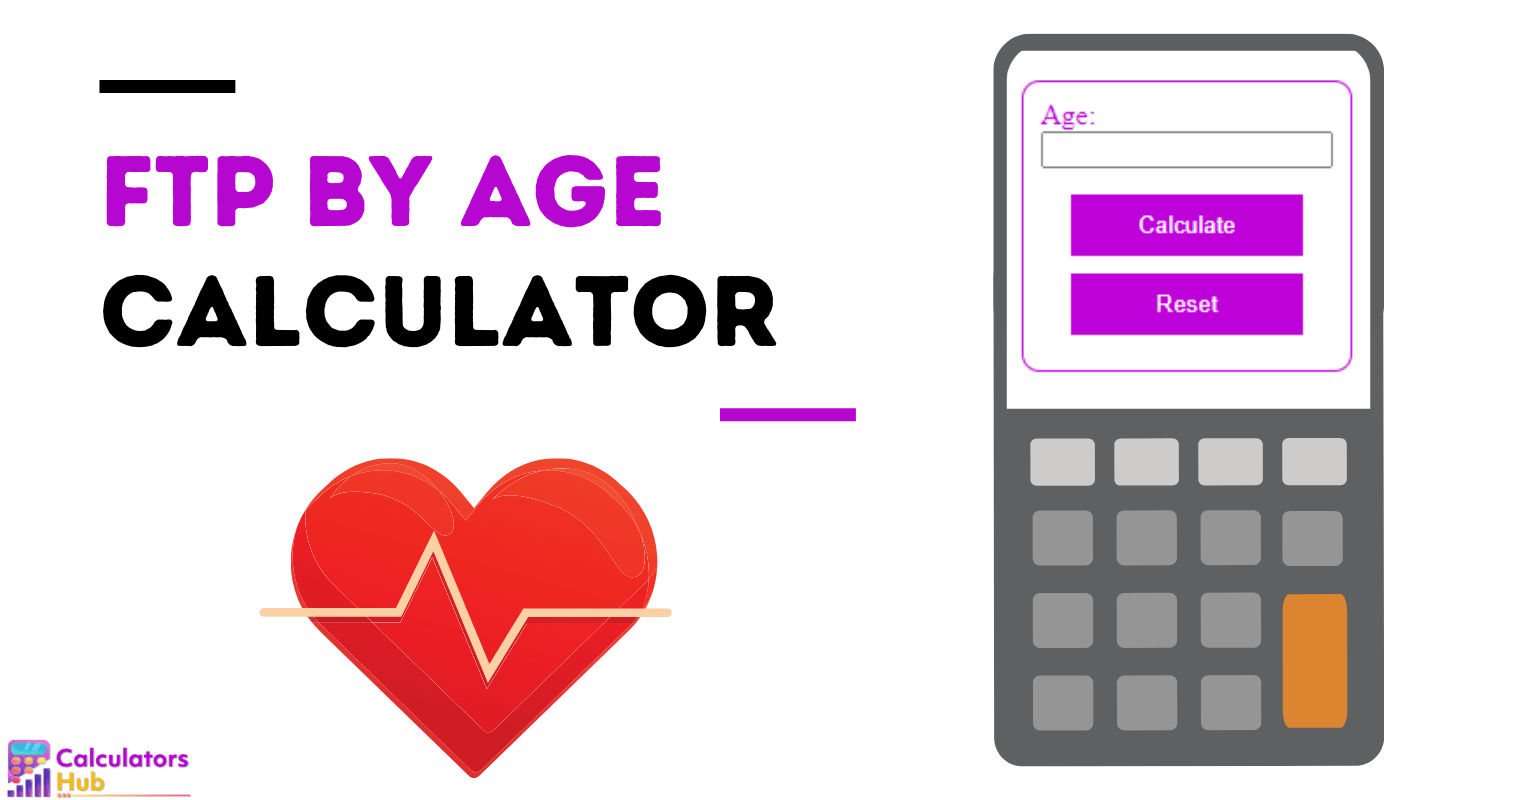 FTP Calculator by Age